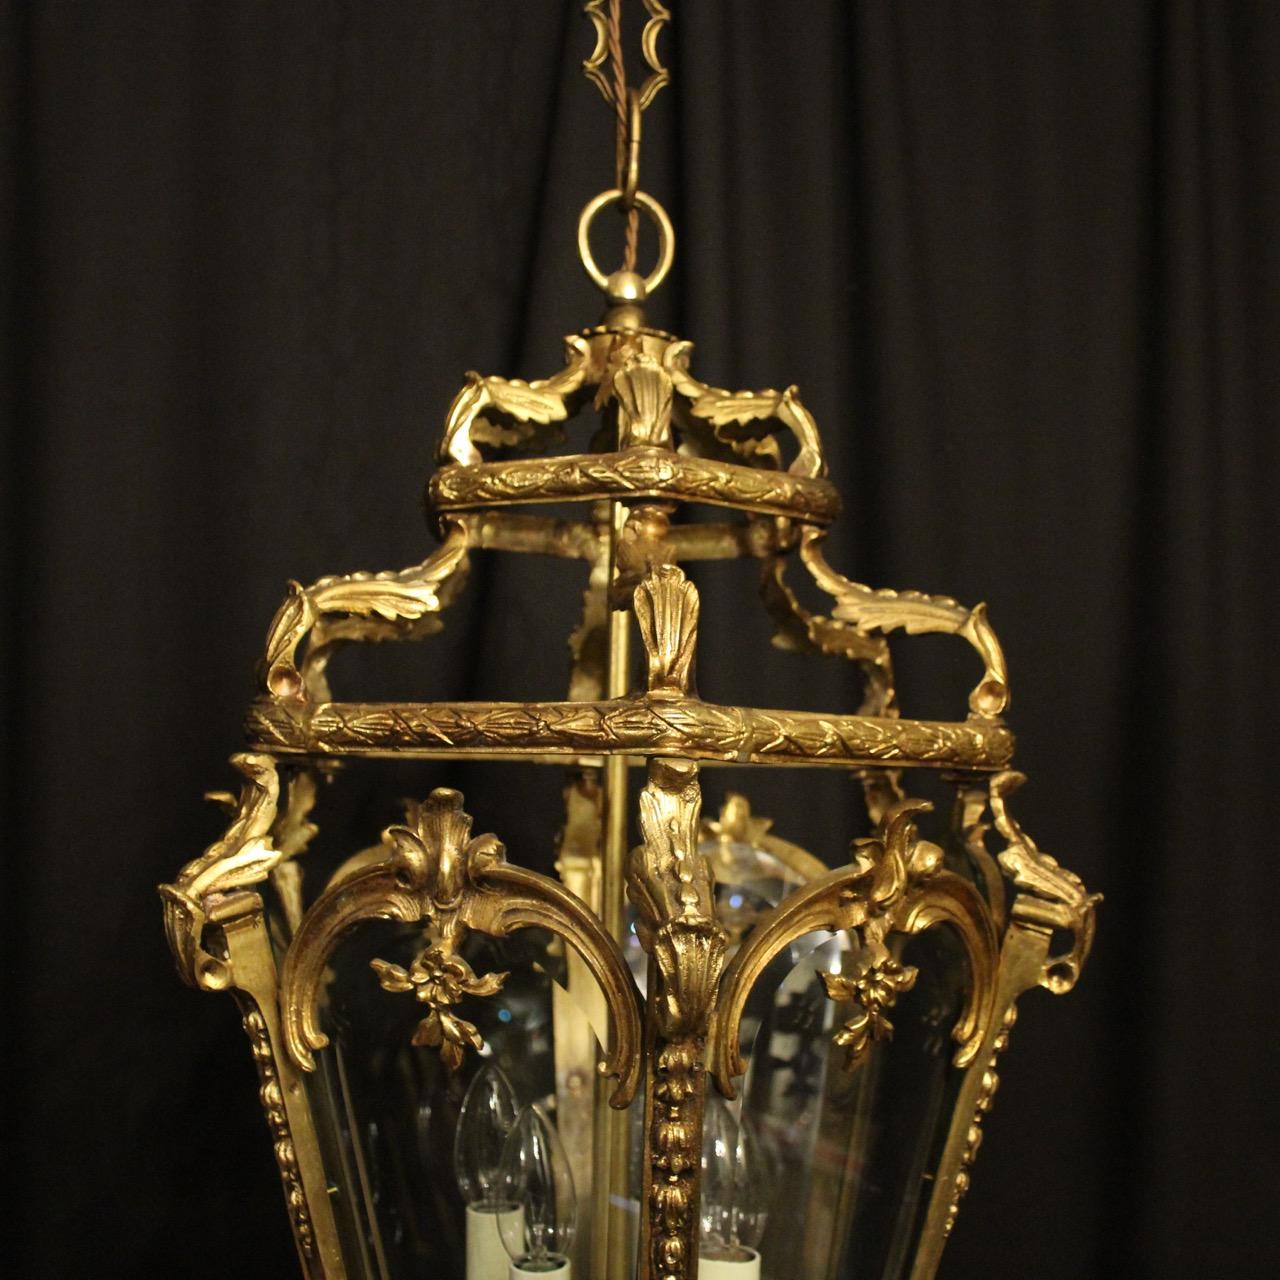 A French late 19th century gilded bronze four-light hexagonal antique hall lantern, the six original beveled glass panels held within an ornate scrolling framework with four light fittings and having decorative scrolled inverted floral central leaf